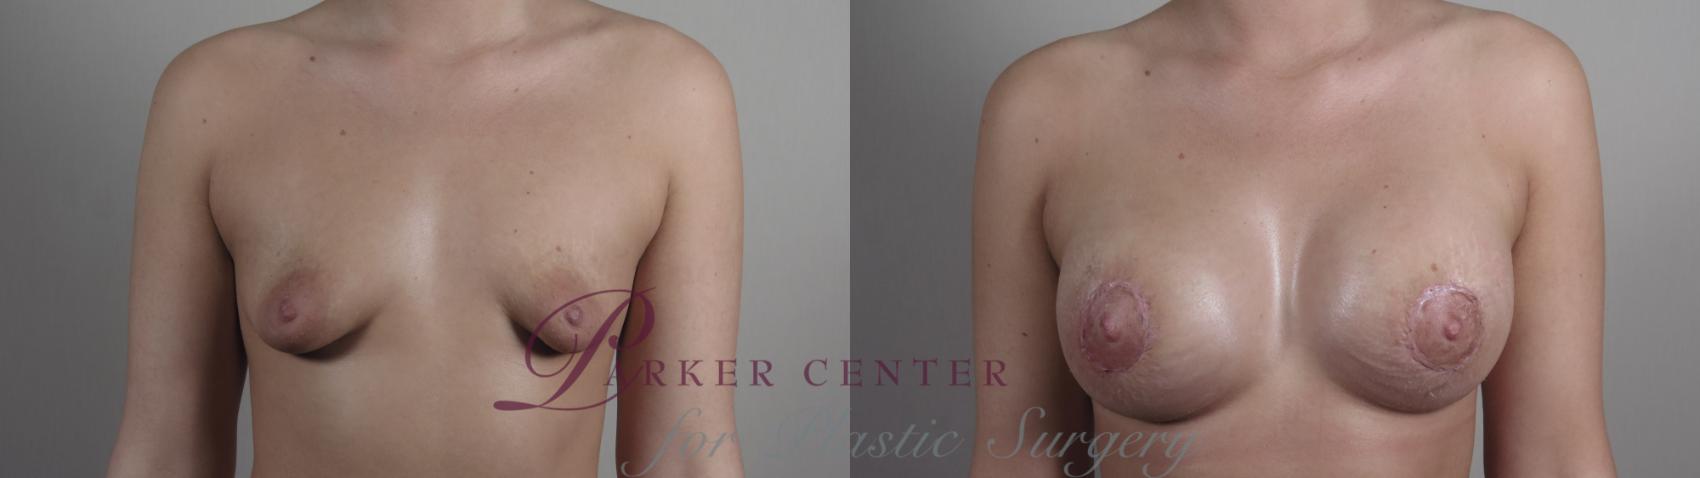 Correction of Tubular Breasts Case 972 Before & After Front | Paramus, NJ | Parker Center for Plastic Surgery